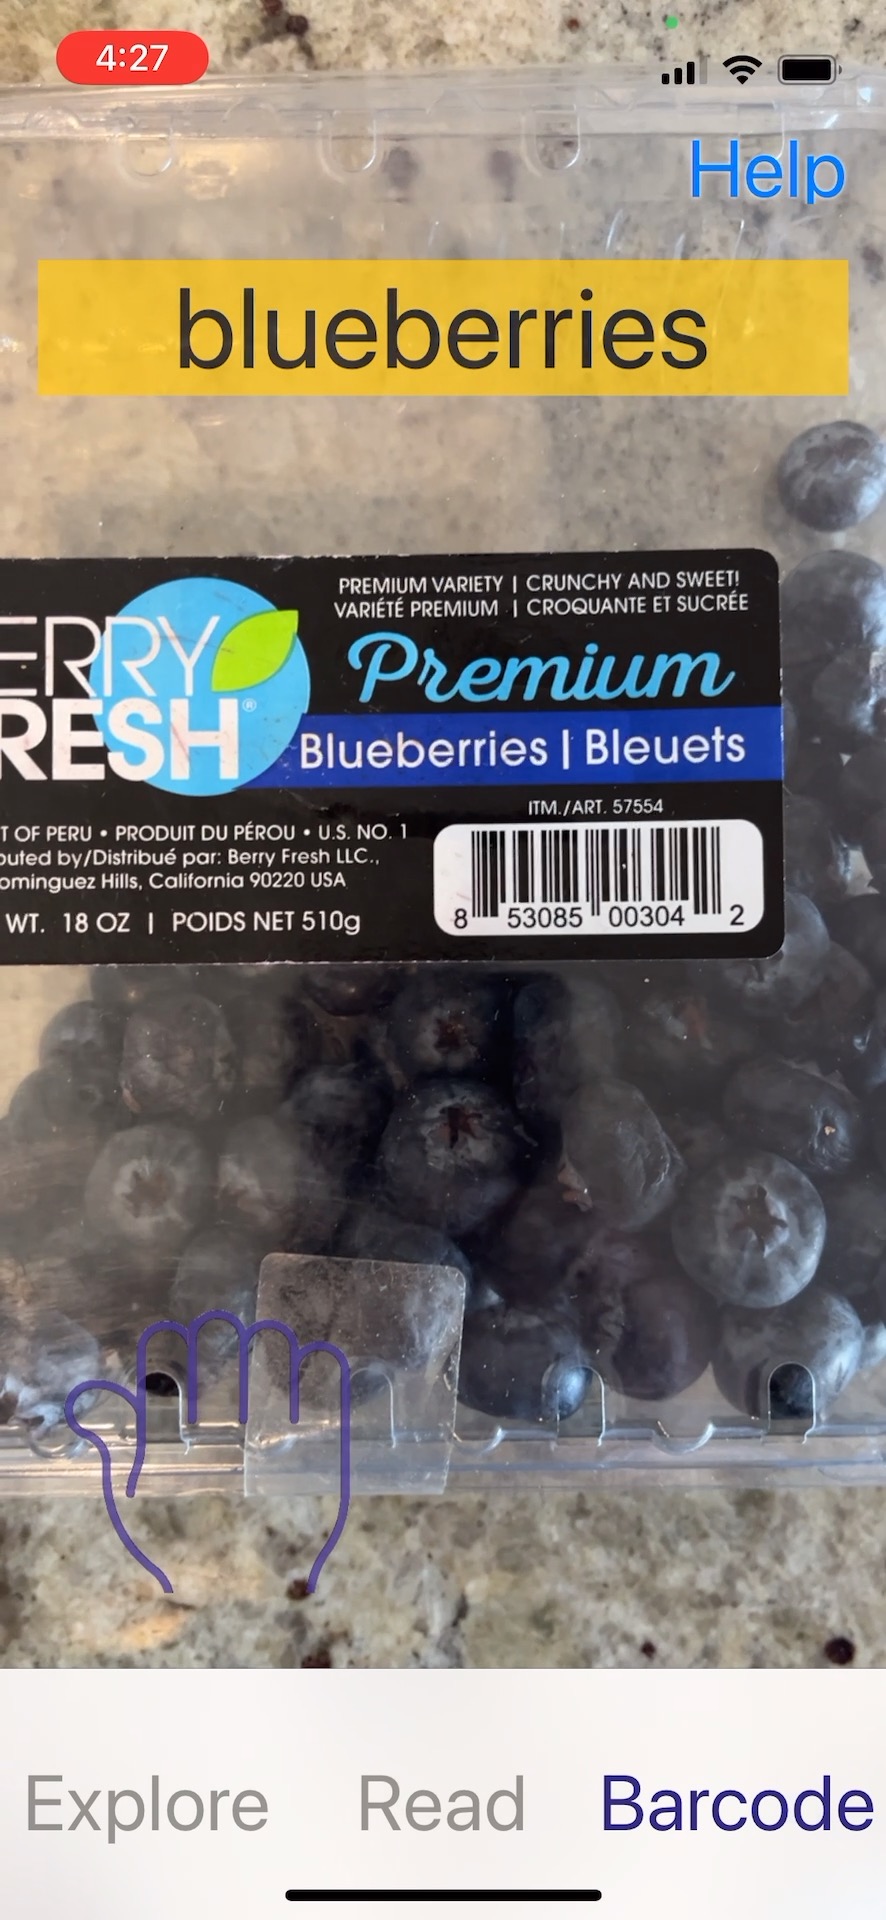 The Echobatix app displays the word "blueberries" after reading the barcode of a pack of blueberries.